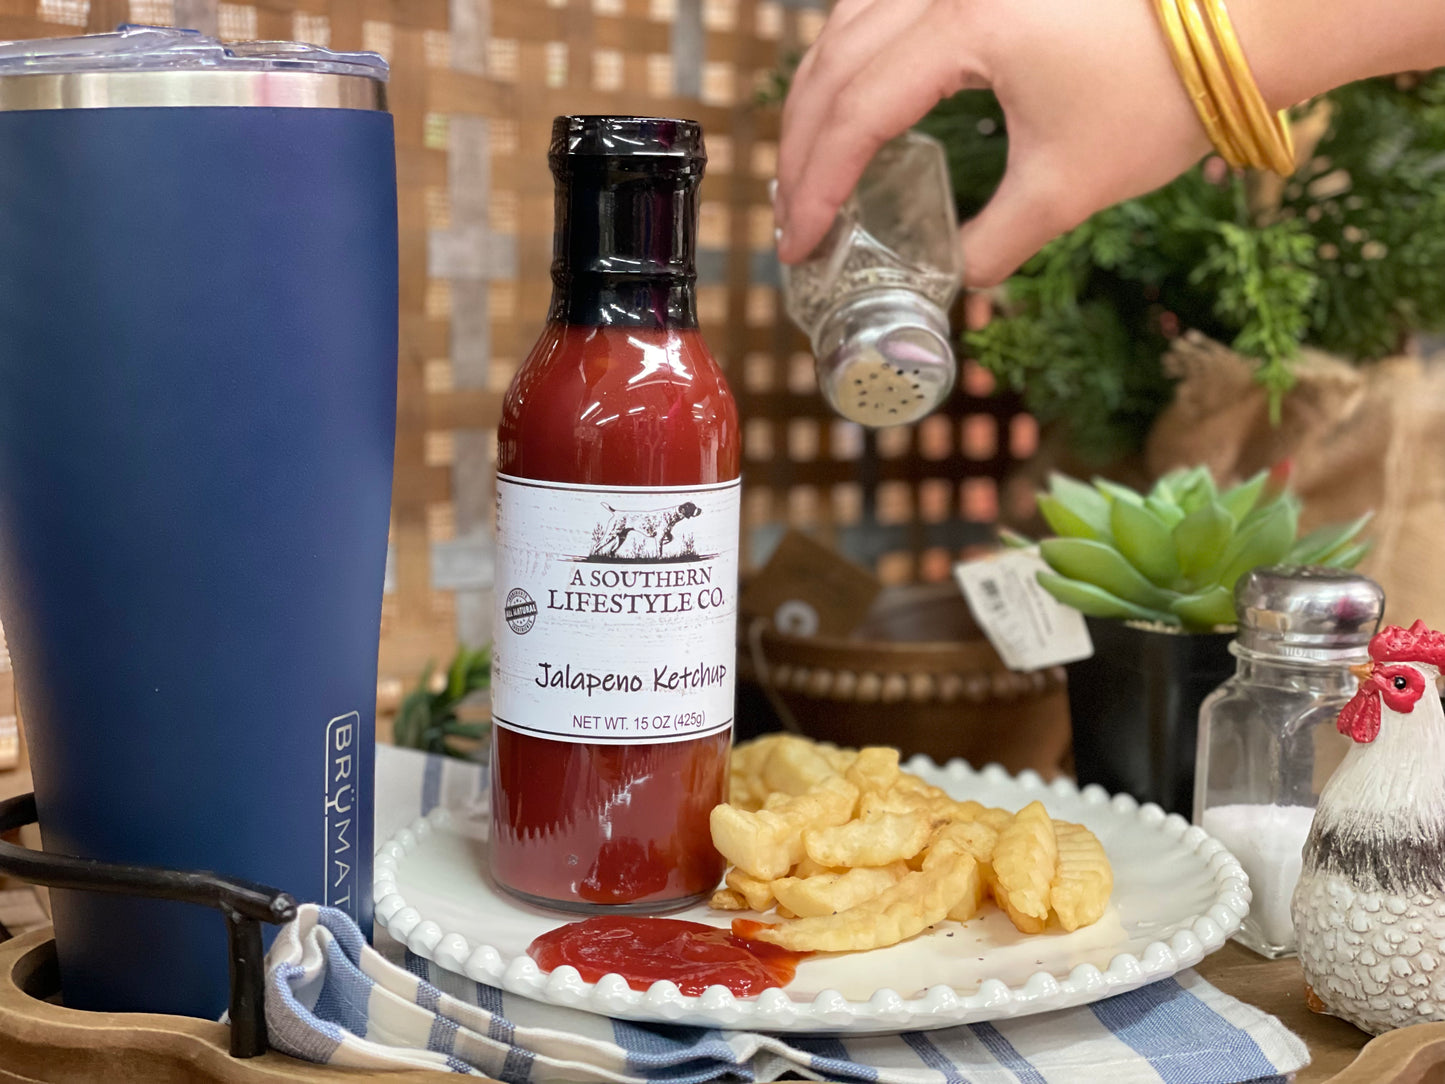 A Southern Lifestyle Co Ketchup